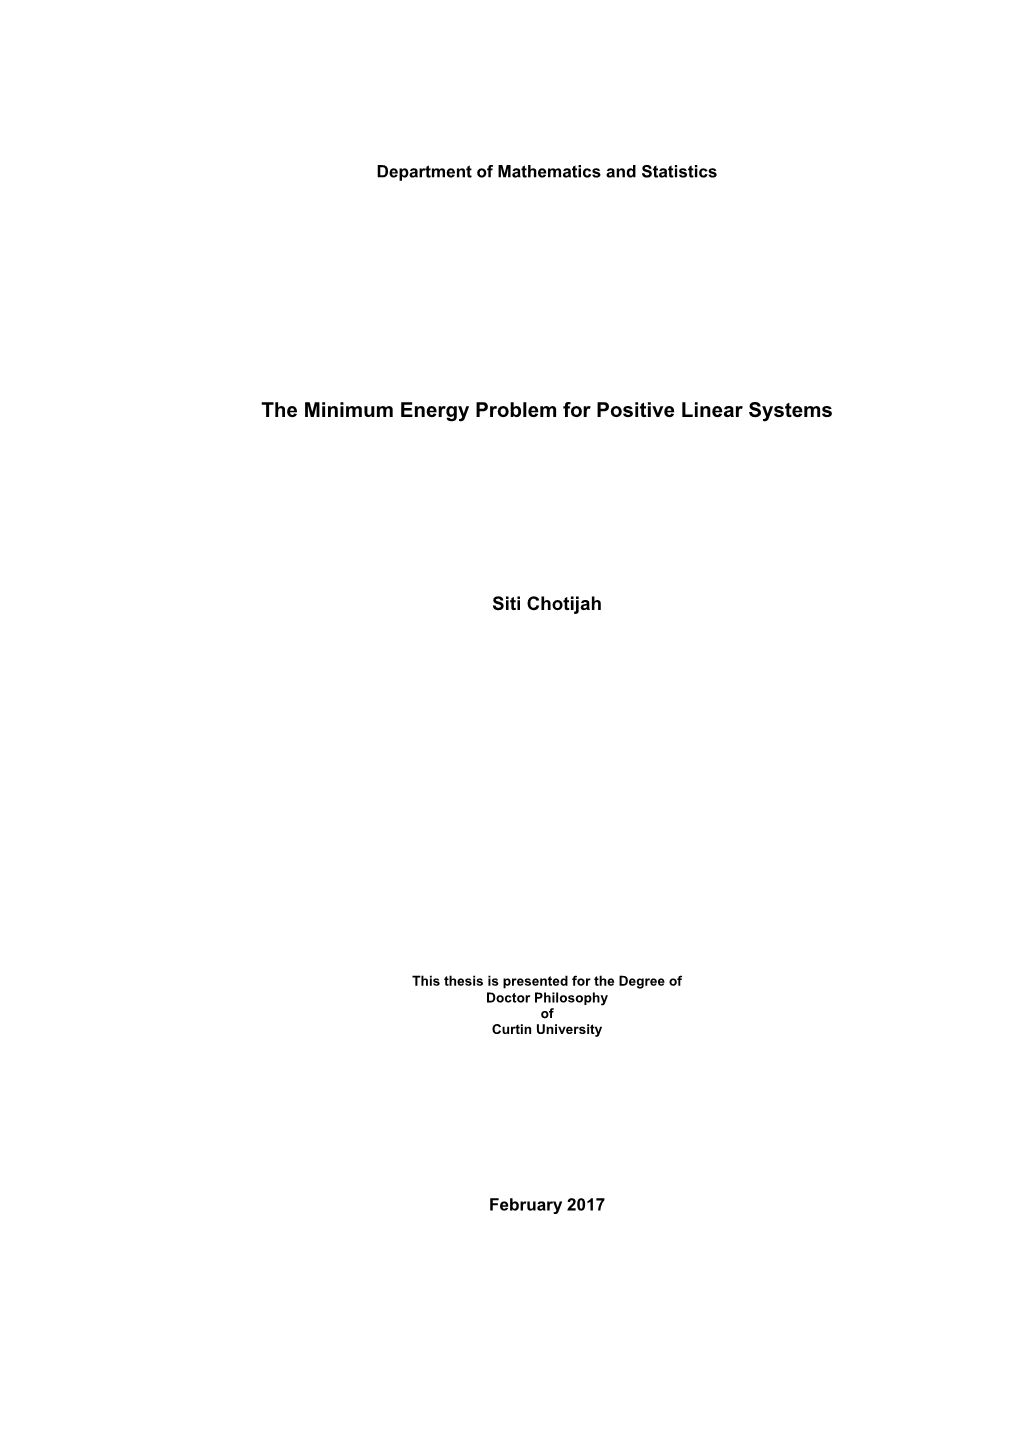 The Minimum Energy Problem for Positive Linear Systems